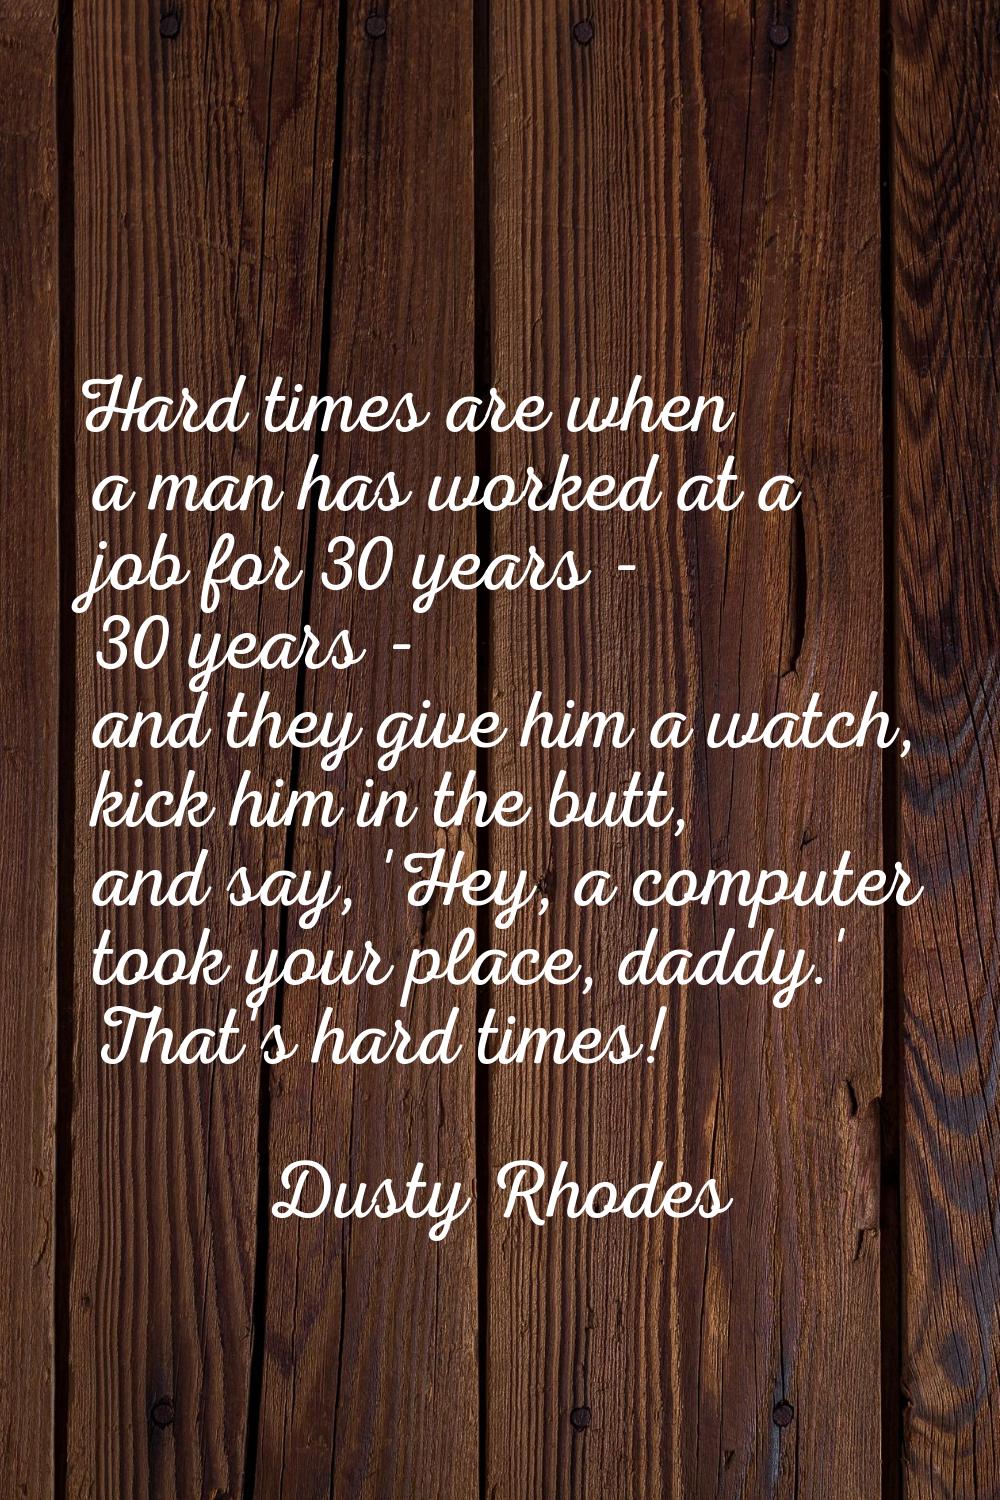 Hard times are when a man has worked at a job for 30 years - 30 years - and they give him a watch, 